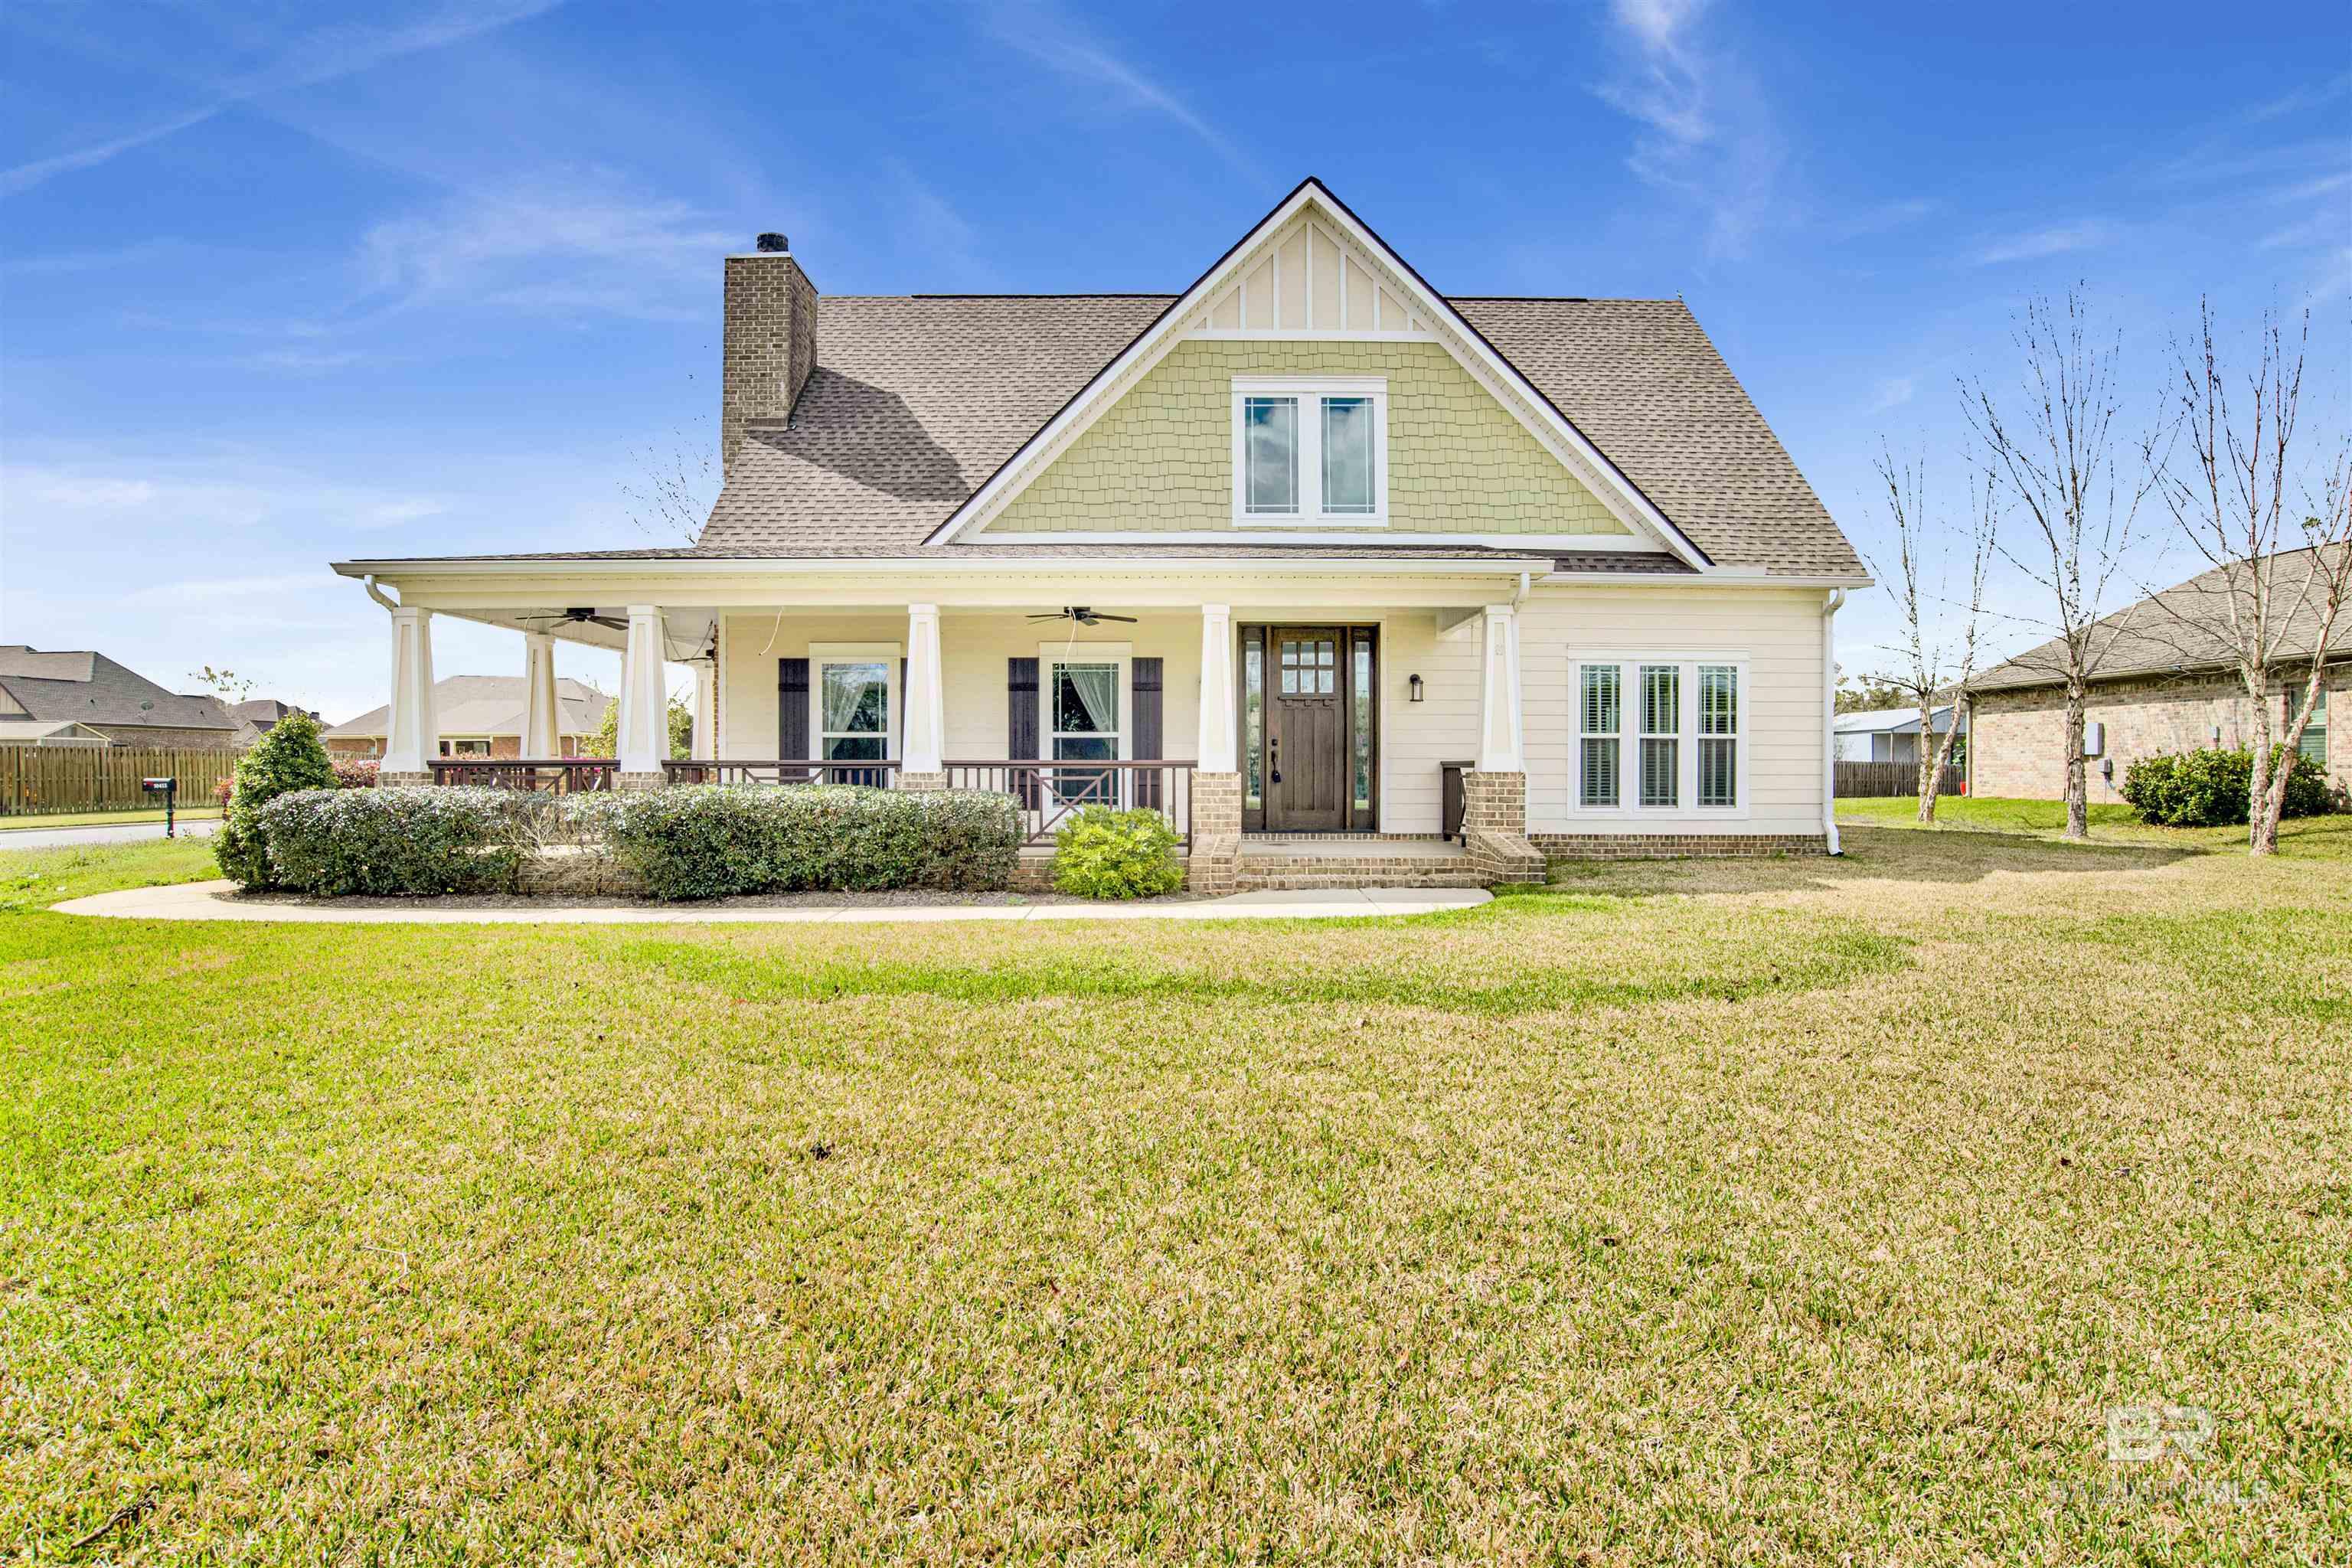 Welcome home to highly sought after Waterford Subdivision!  Centrally located on the edge of Daphne, you're just minutes from the interstate and Alabama's Gulf Coast!  This truly custom craftsman boasts so many upgrades.  Scored and stained concrete floors on the lower level, stone counters throughout, custom trim package, cozy wood burning fire place, stainless appliances, custom chefs kitchen, wrap around front porch, MASSIVE 15 X 22 bonus room, screened in back patio, two car garage and the list goes on!  This home has been meticulously maintained and is ready for its new owners.  Call your favorite agent today for your private tour!